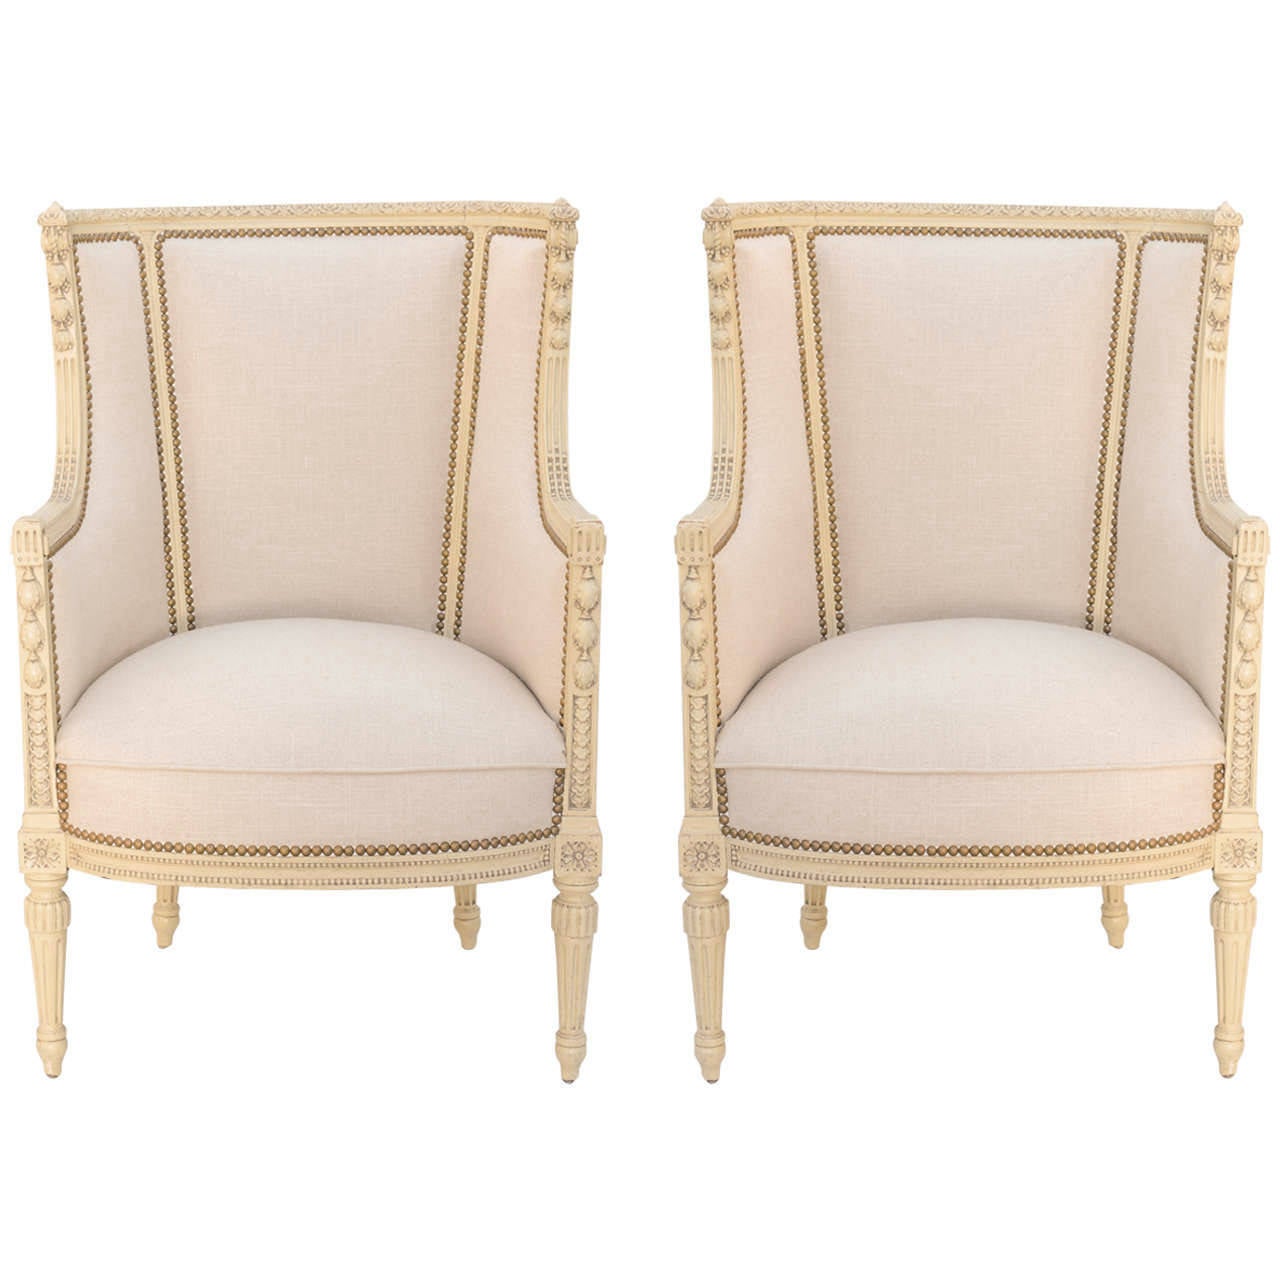 Fine Pair of Painted Bergeres in French Linen, 19th Century For Sale